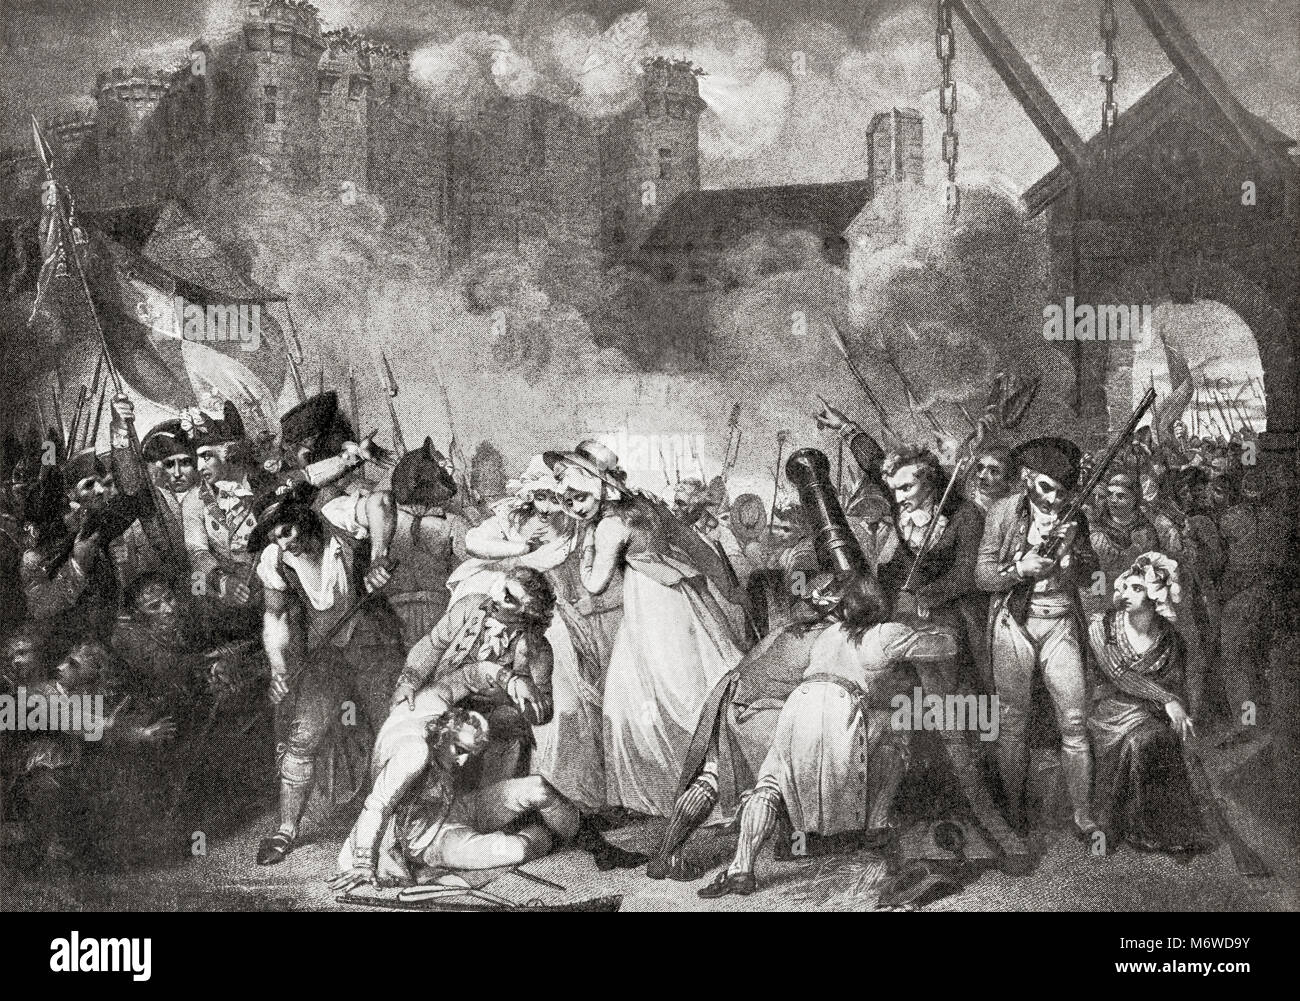 The Storming of the Bastille, Paris, France, 14 July 1789. From Hutchinson's History of the Nations, published 1915. Stock Photo